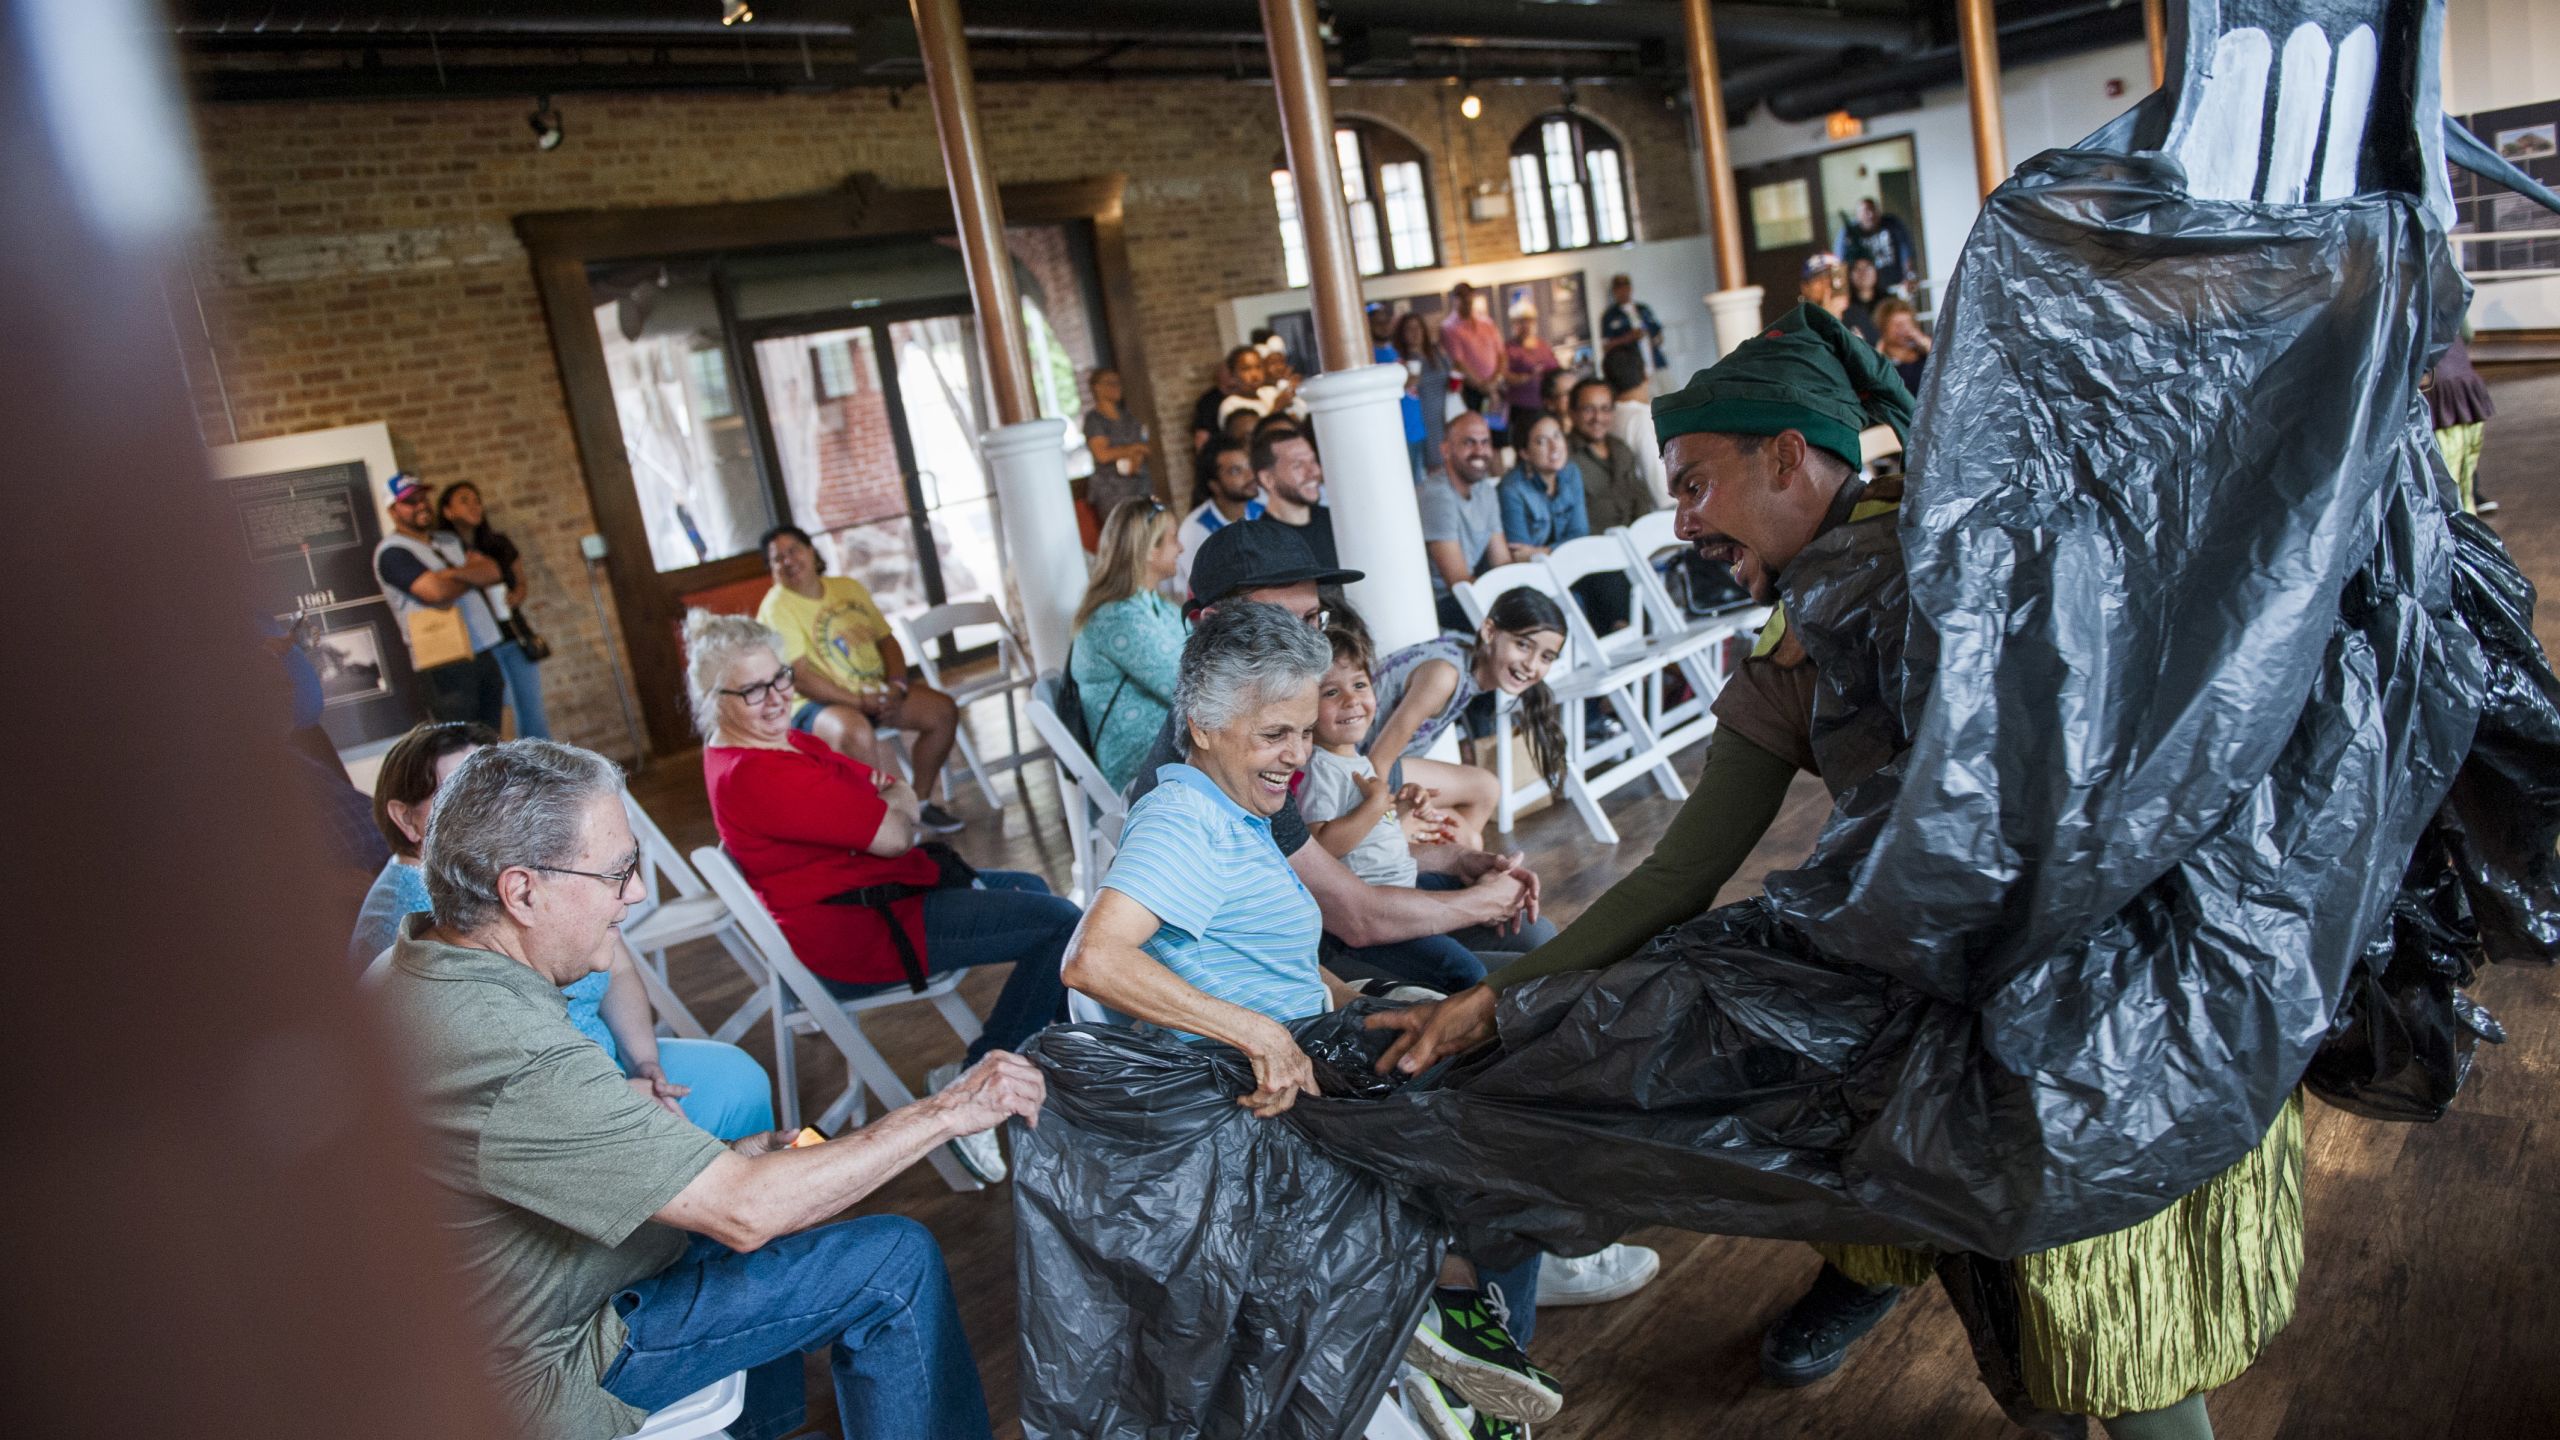 Carlos Jose Torres hands a large trash bag to audience members during a show. The trash bag symbolizes the hurricane.